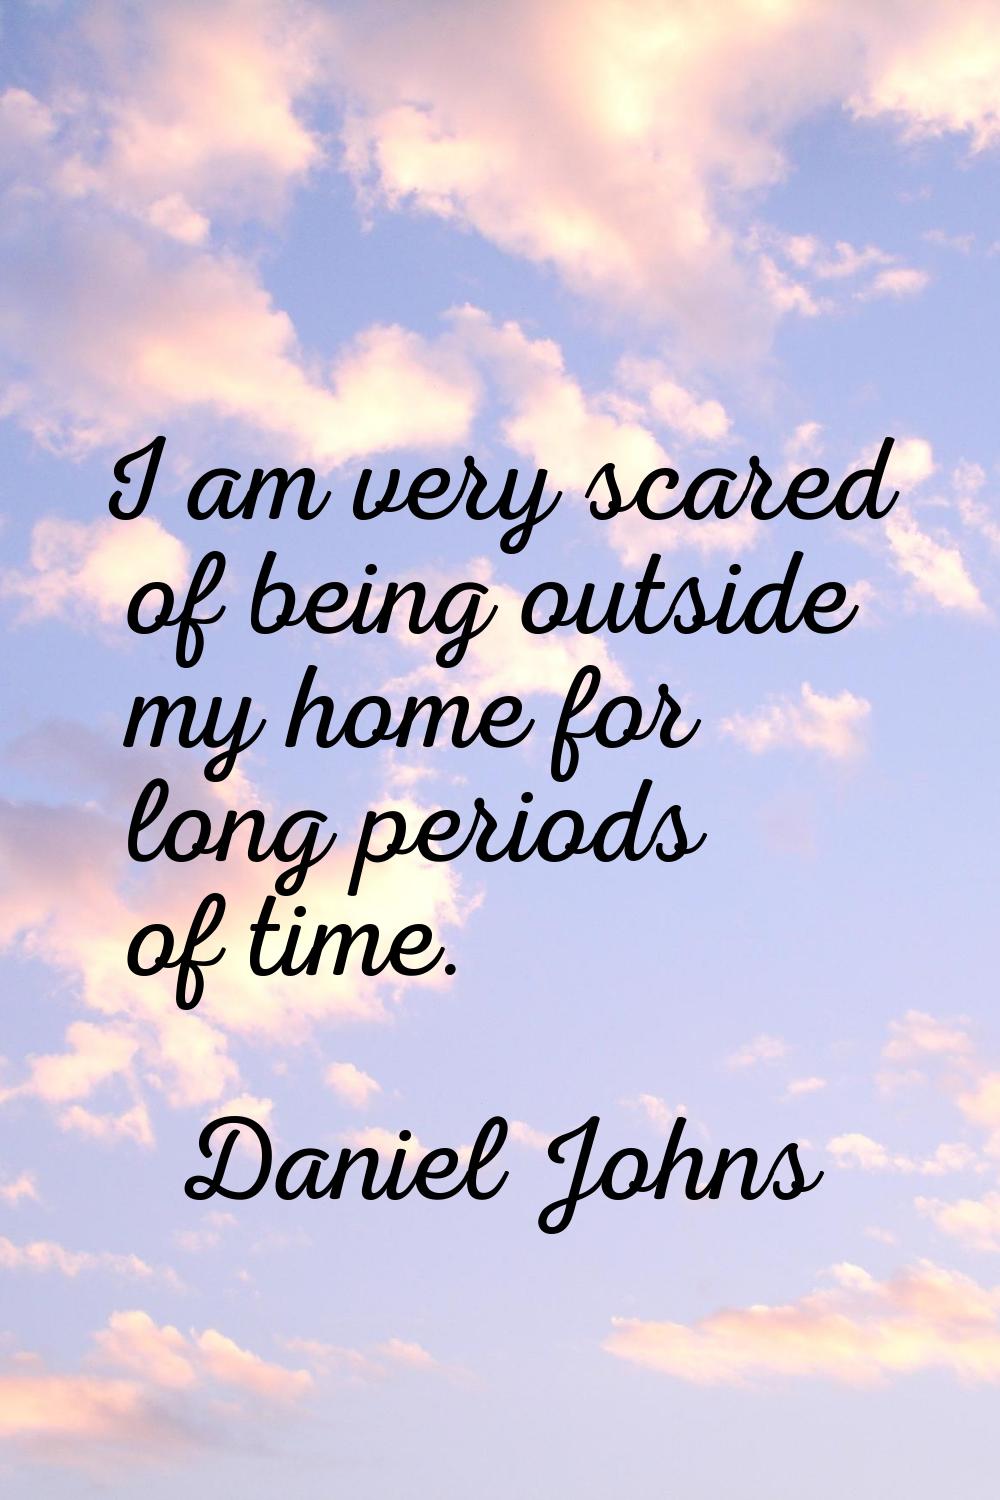 I am very scared of being outside my home for long periods of time.